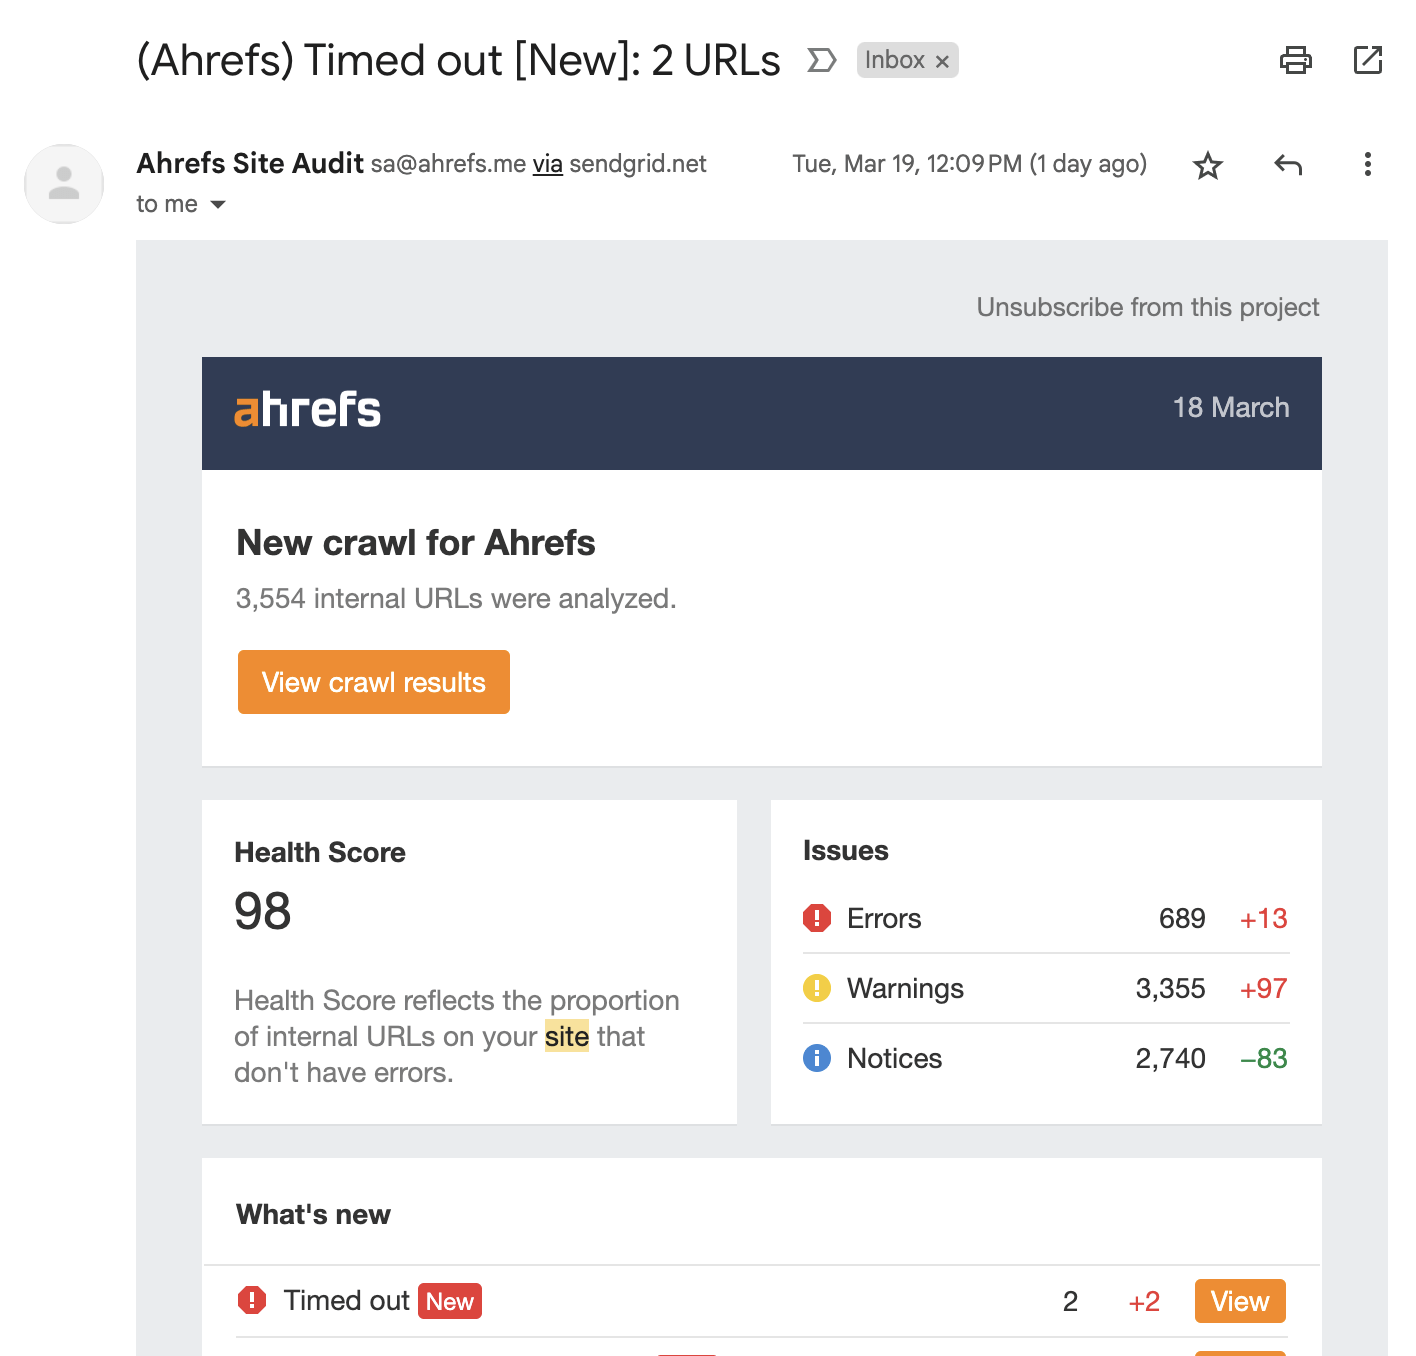 Email alert from Ahrefs' Site Audit